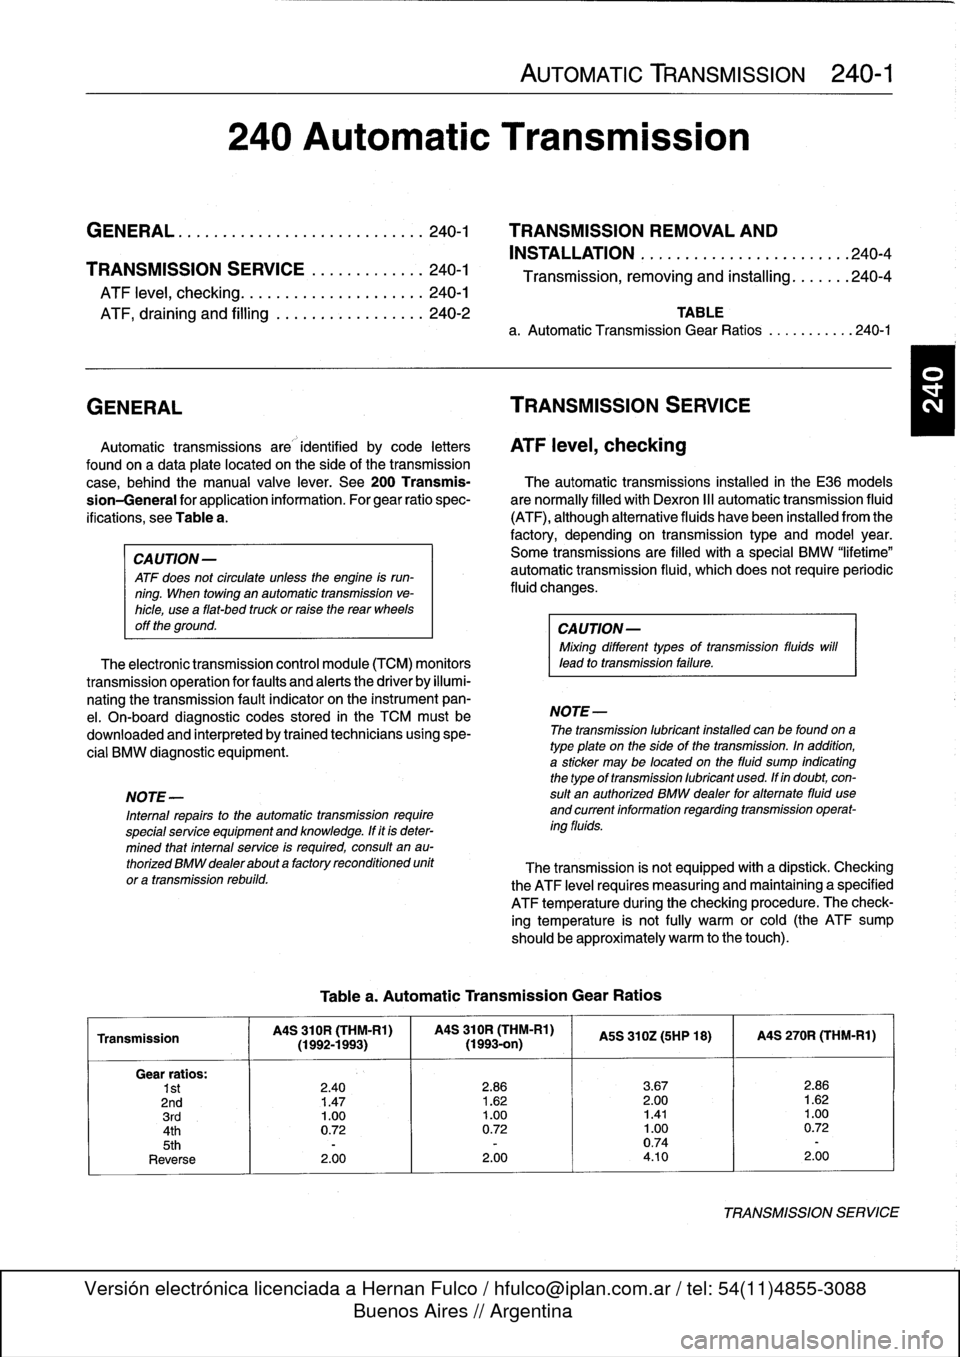 BMW 318i 1998 E36 Workshop Manual 
AUTOMATIC
TRANSMISSION

	

240-1

240
Automatic
Transmission

GENERAL
.....
.
.
.
.
.
.
.
.
.
.
.
.
.
.........
.
240-1

	

TRANSMISSION
REMOVAL
AND

INSTALLATION
..................
.
.
.
.
.240-4
TR